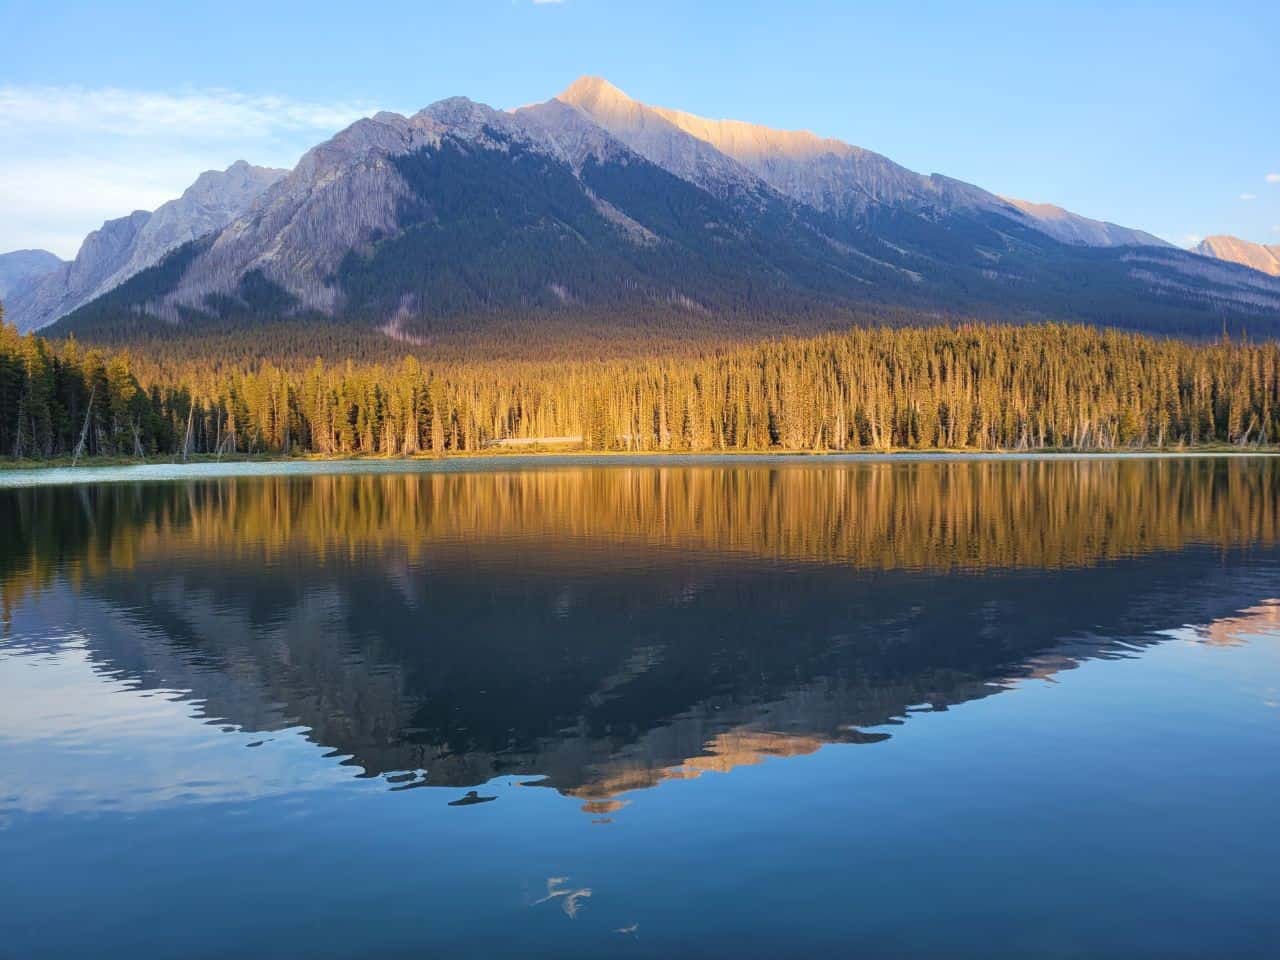 The High Rockies Trail in Alberta offers stunning mountain scenery, perfect reflections, and gorgeous sunsets along its length.